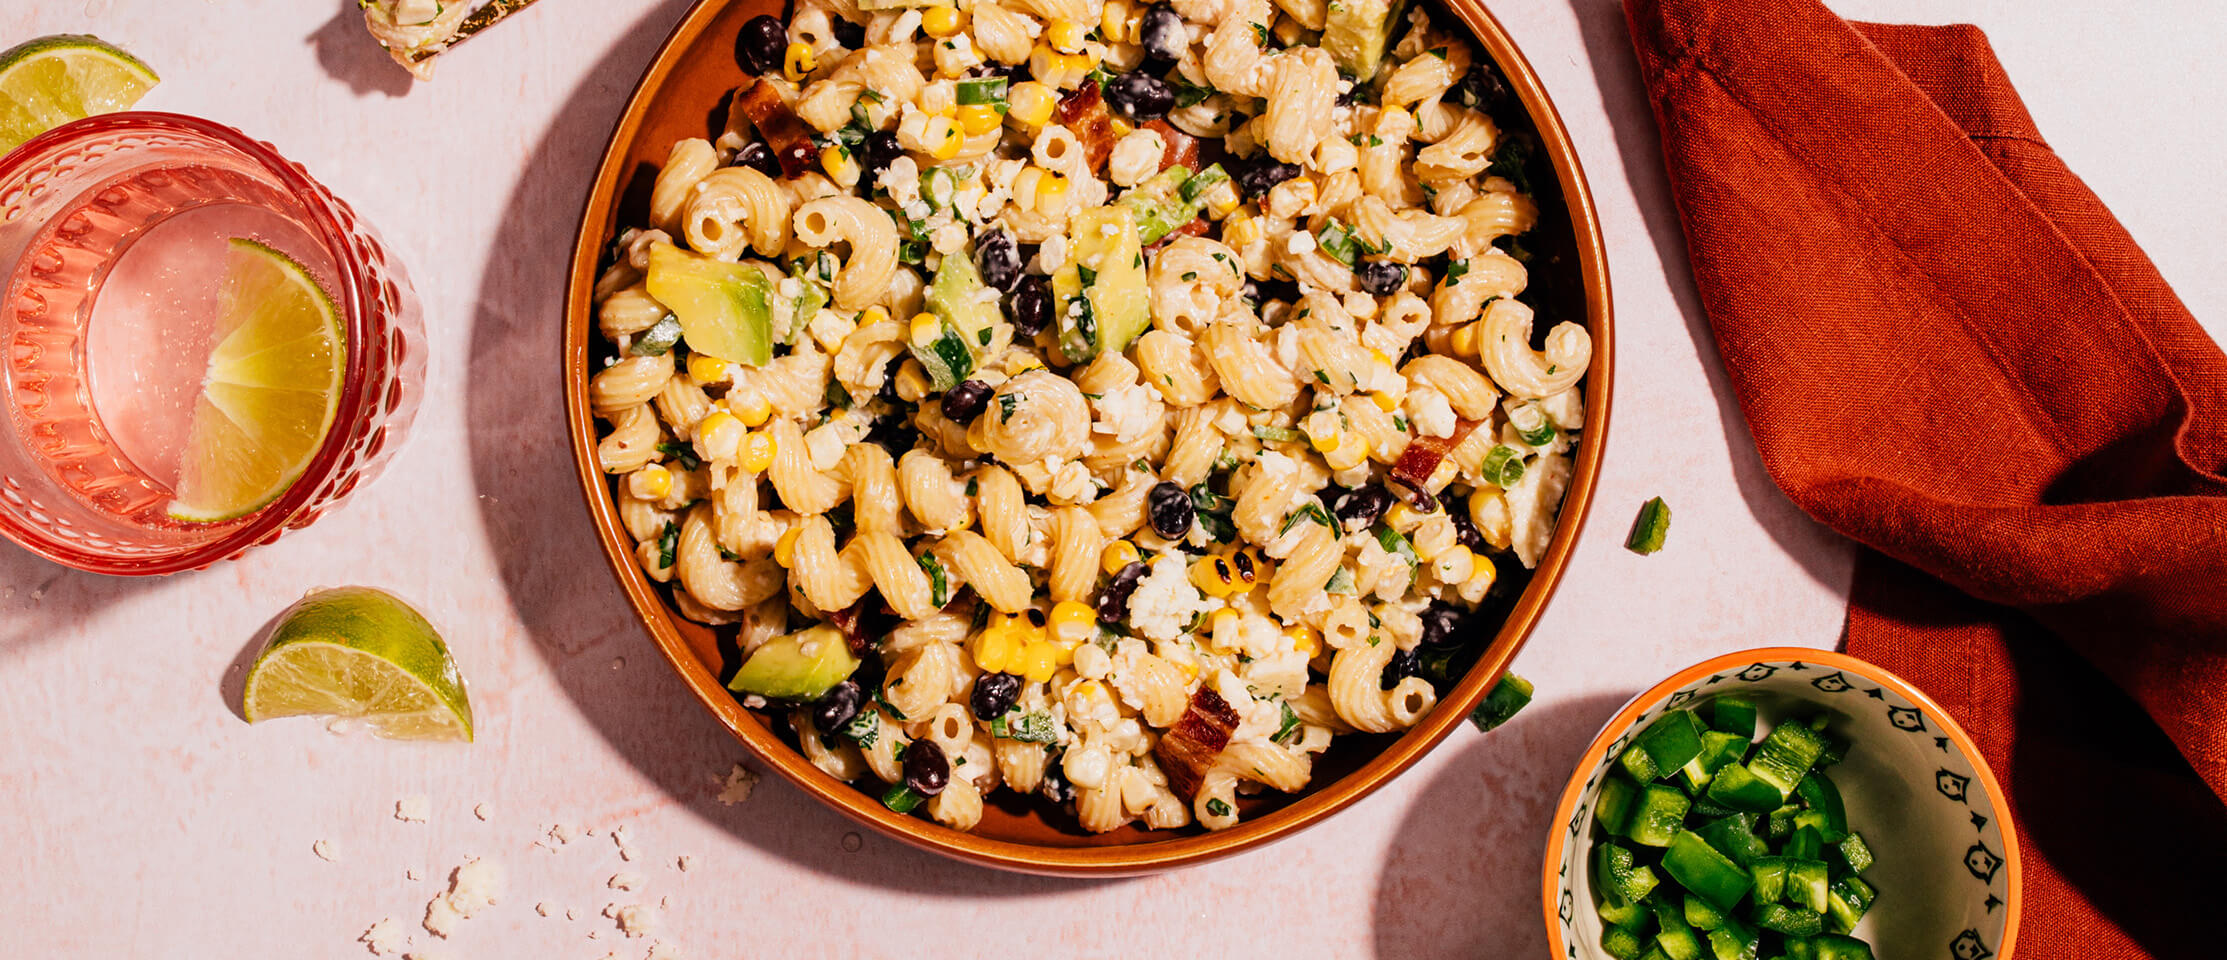 Ronzoni’s Grilled Mexican Street Corn Cavatappi, a vegetarian-friendly grilled dish.